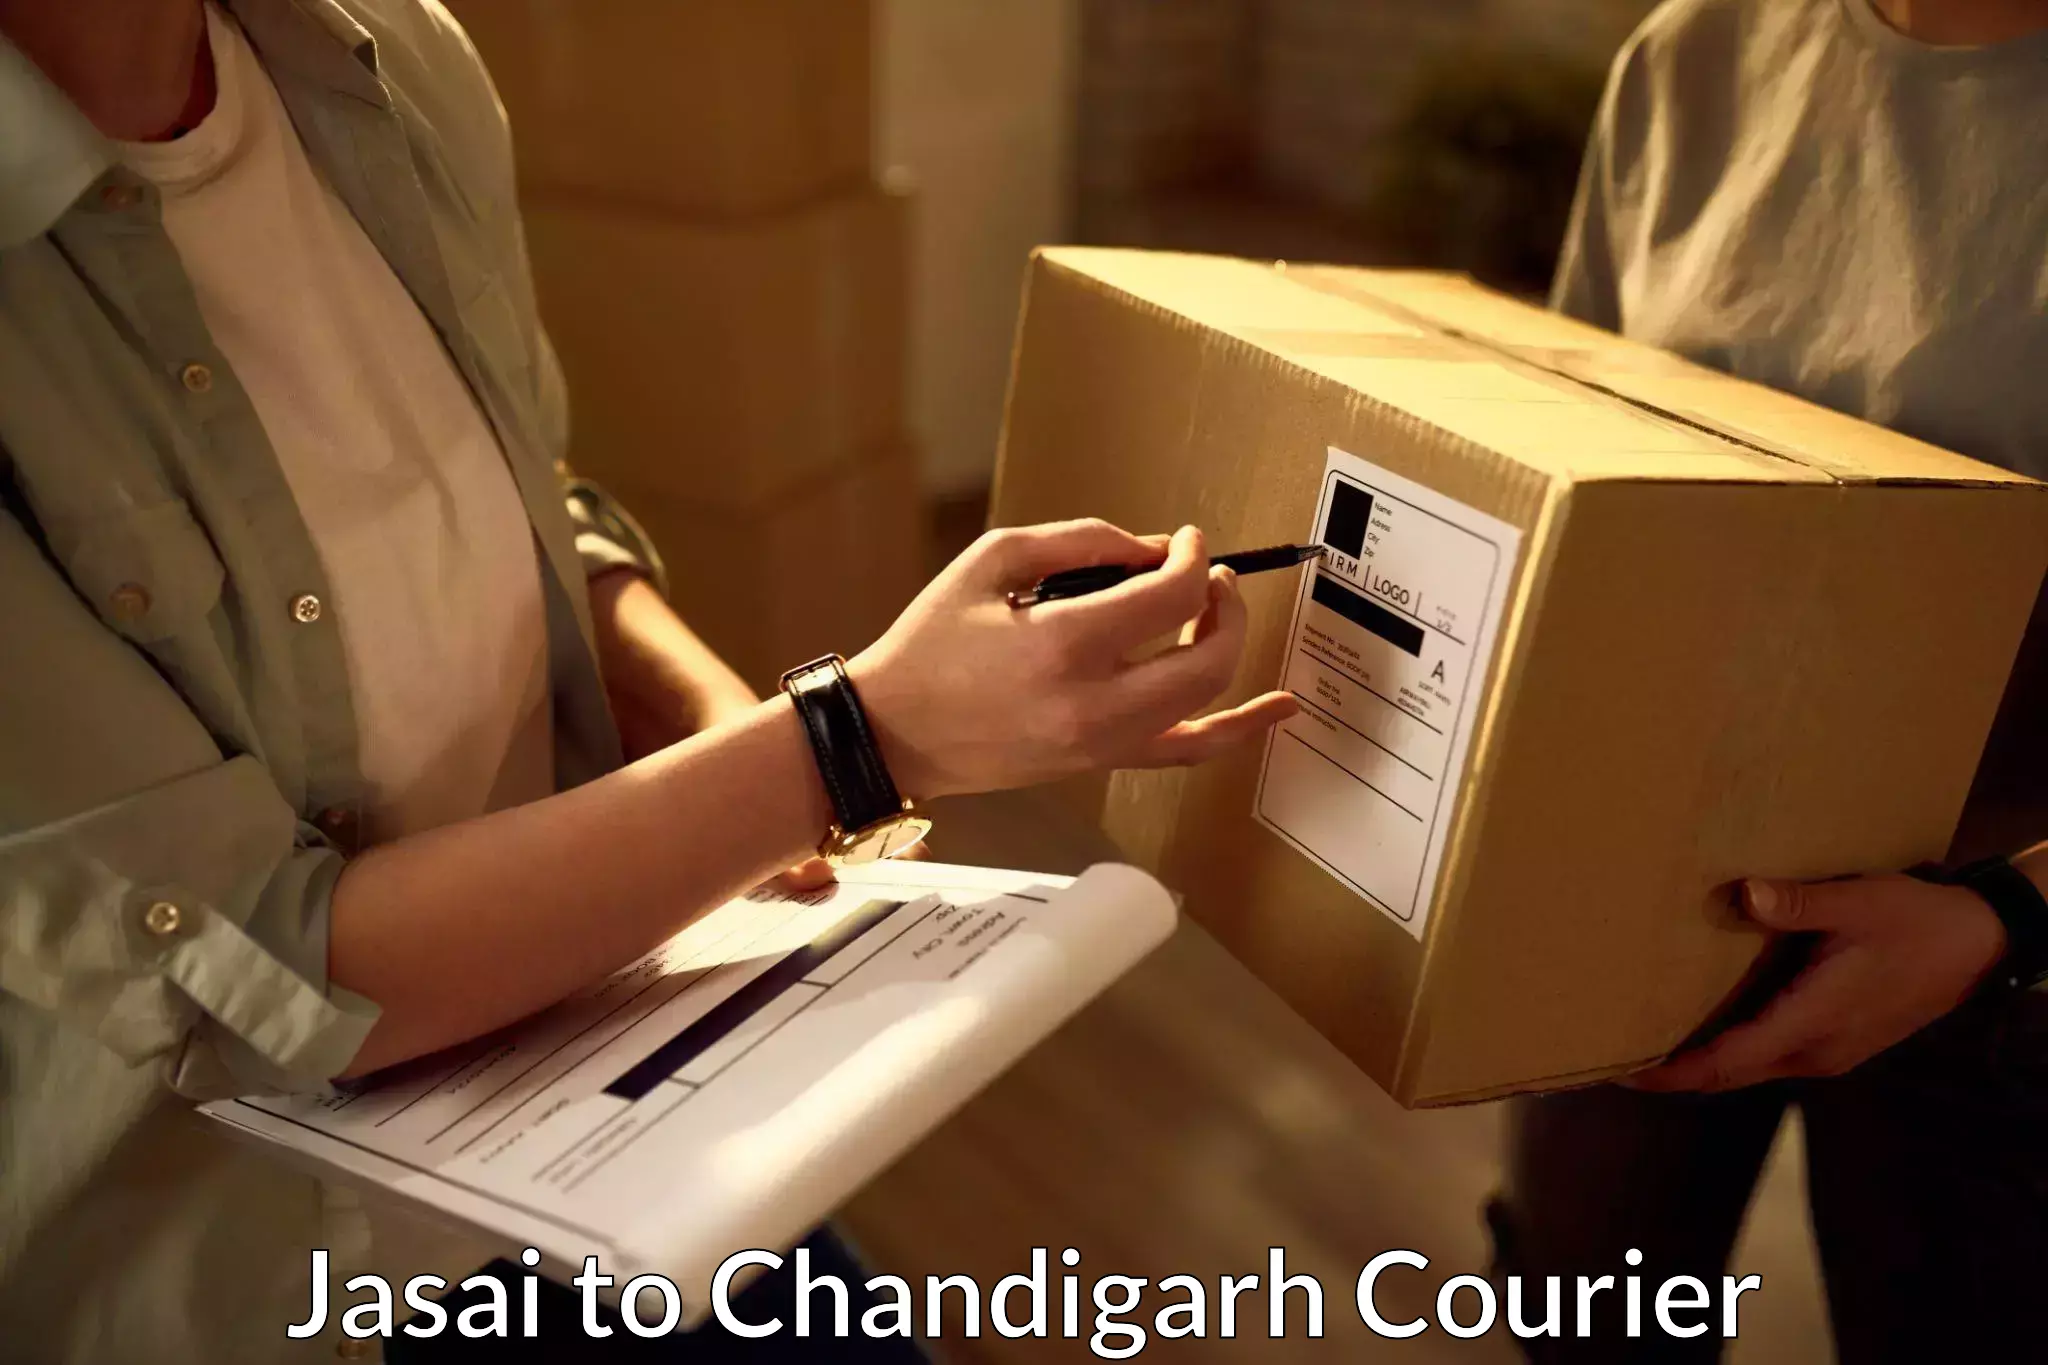 Residential courier service Jasai to Chandigarh